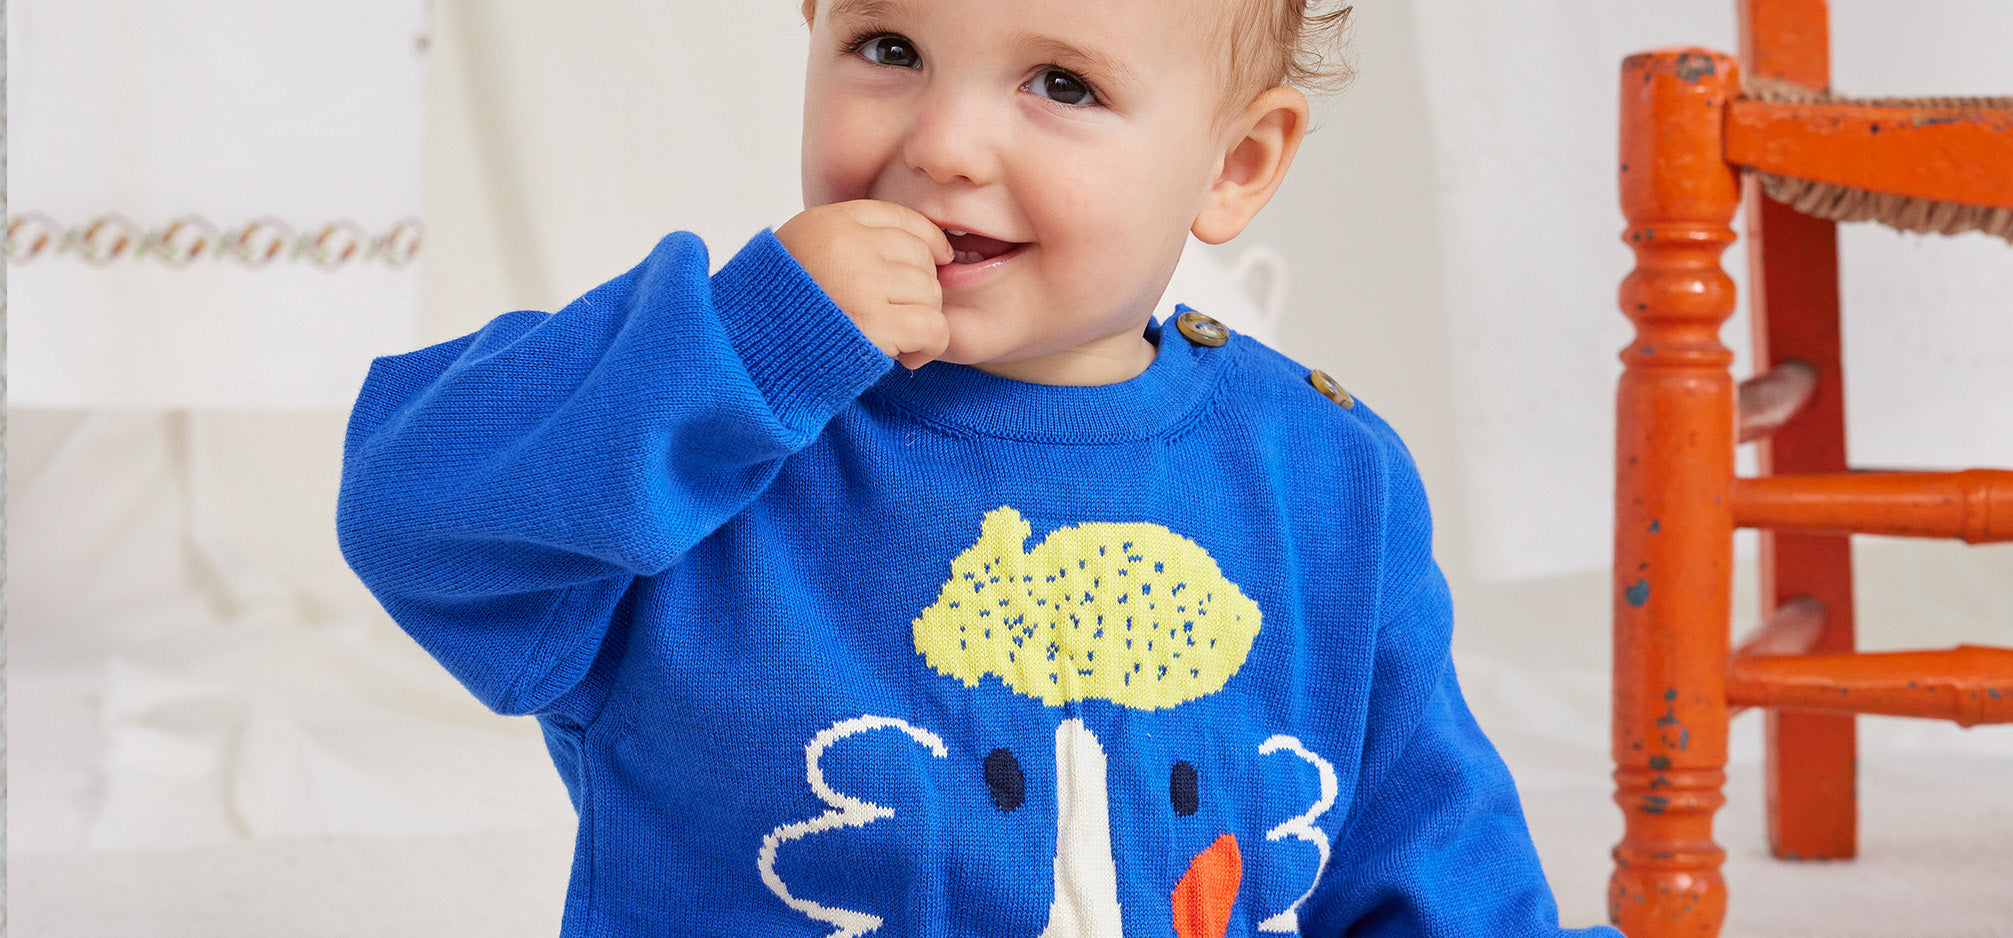 Baby wearing blue bobo choses happy face sweater